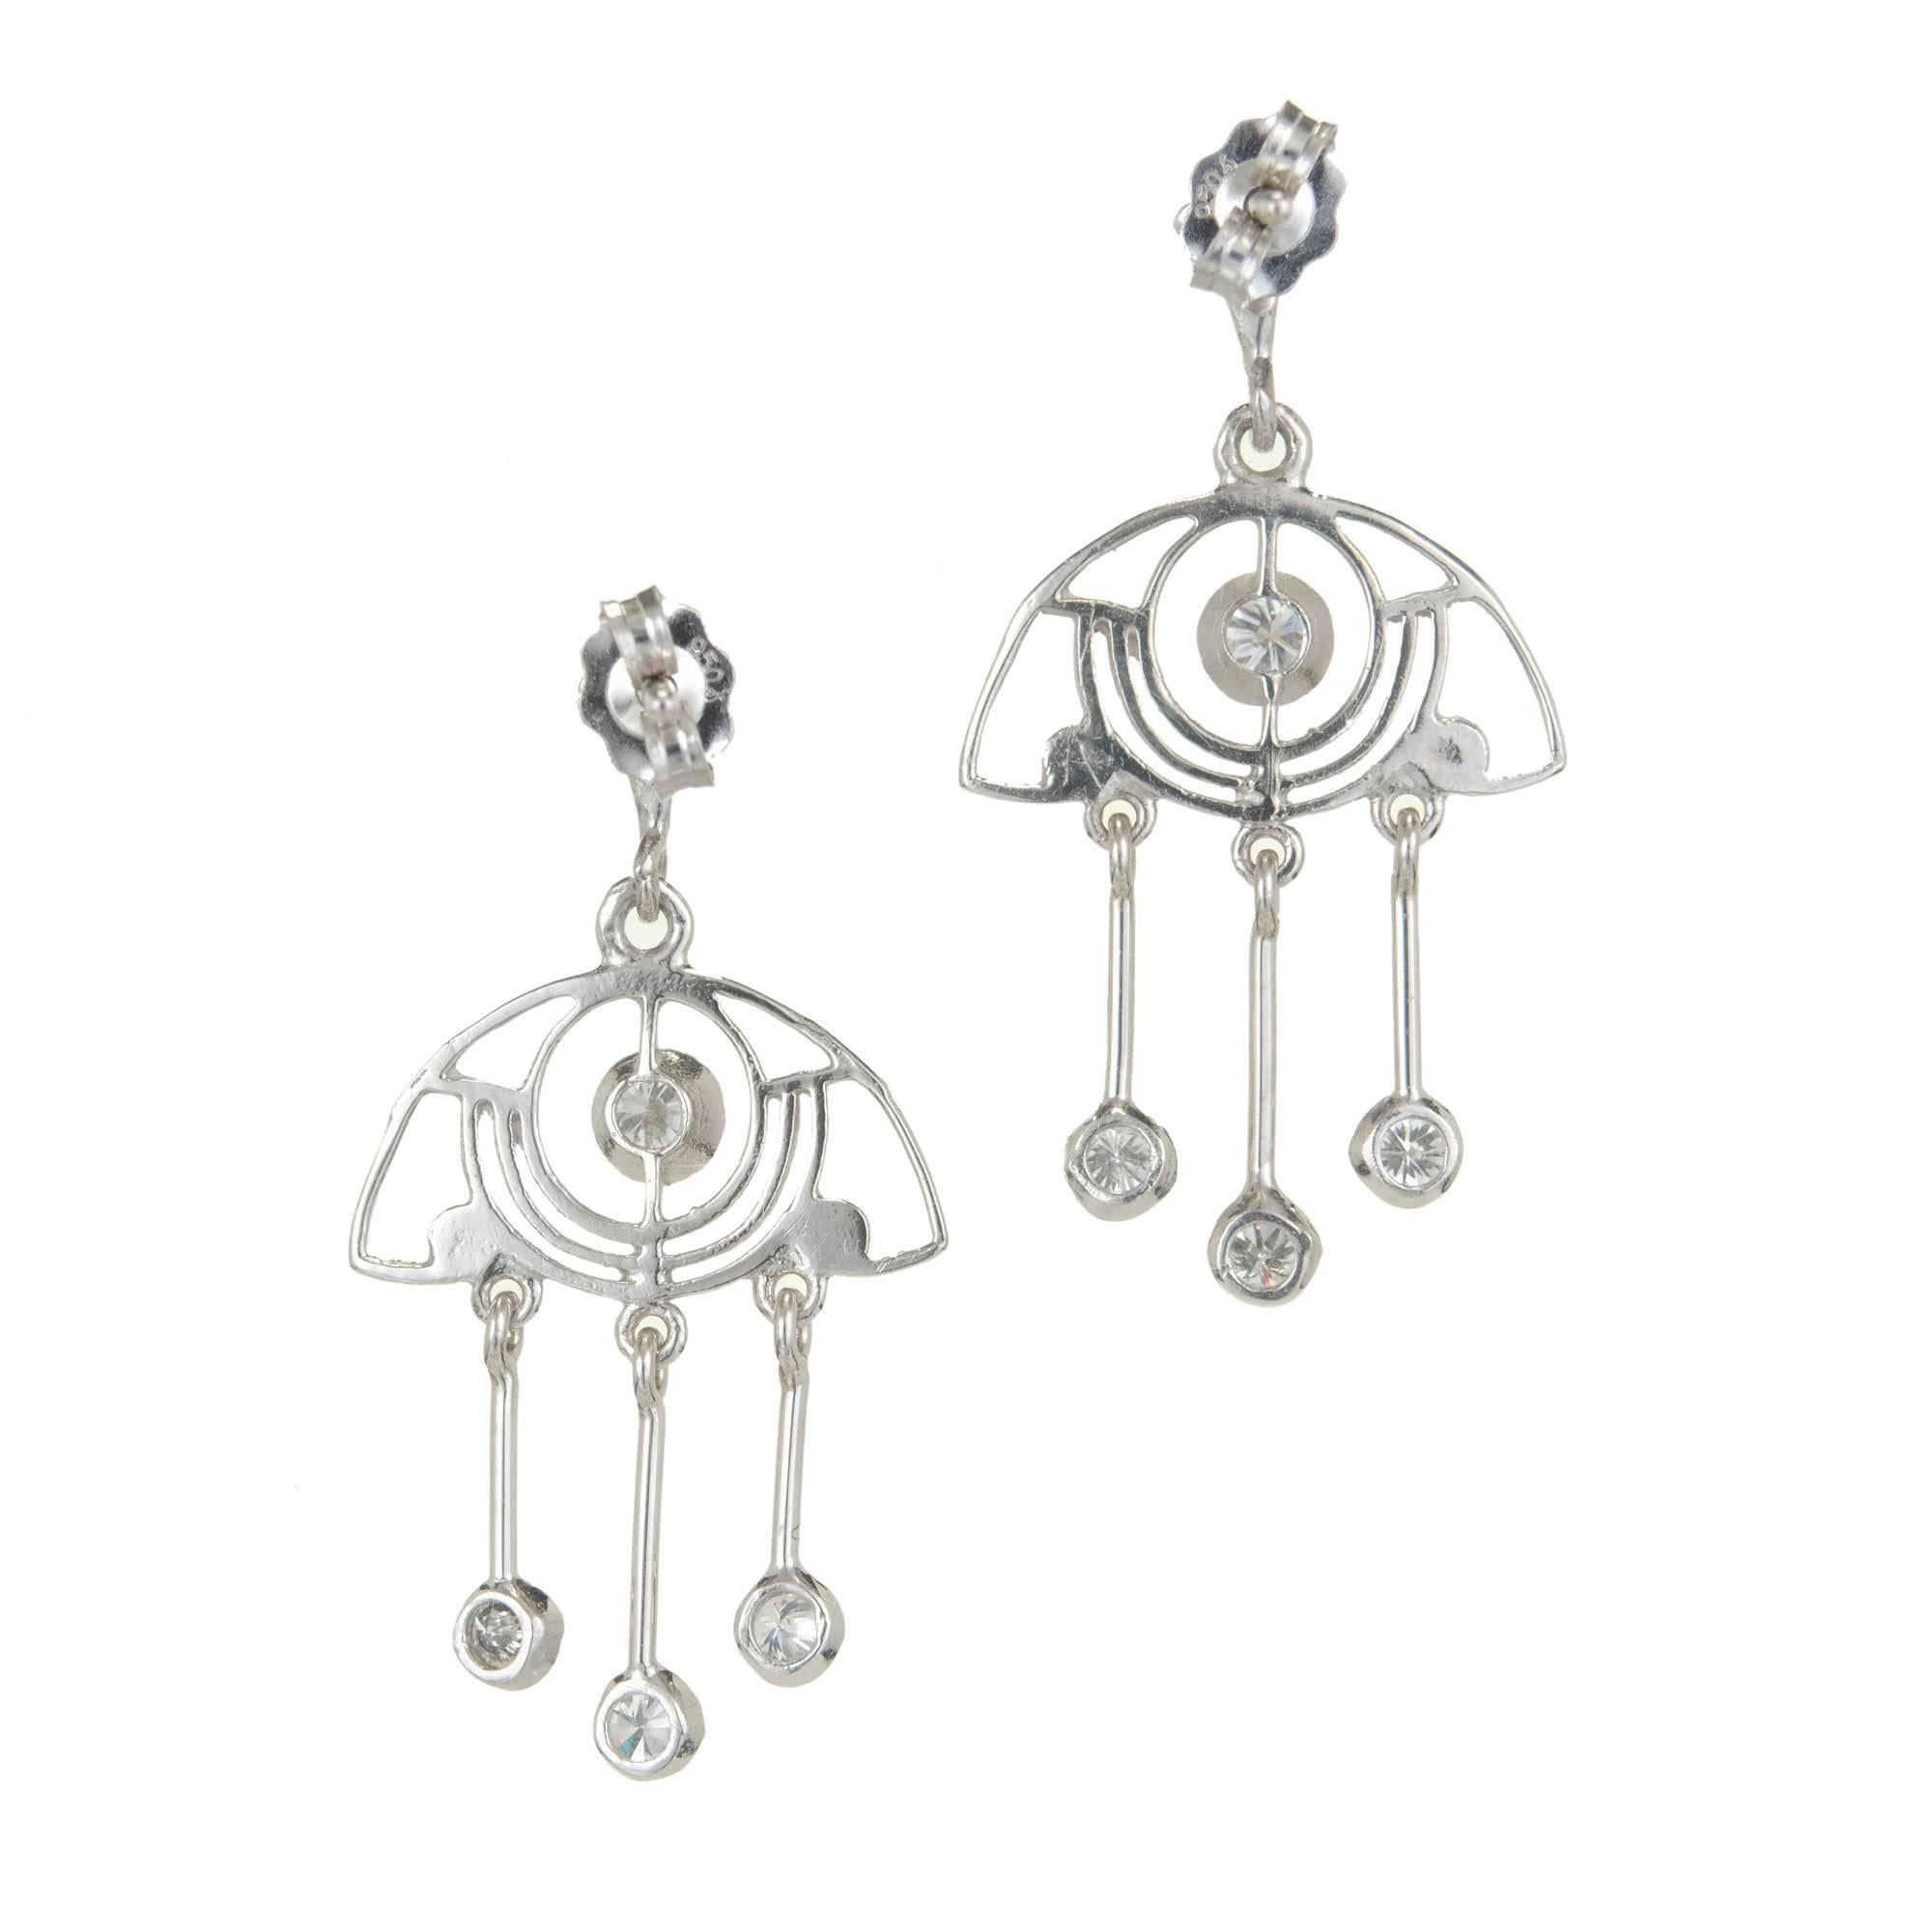 Artistically designed open work diamond dangle chandelier earrings with quality full cut diamonds.

10 brilliant cut diamonds, approx. total weight .64cts, F-G, VS
Platinum
4.1 grams
Tested: Platinum
Stamped: 950 on earrings back
Top to bottom: